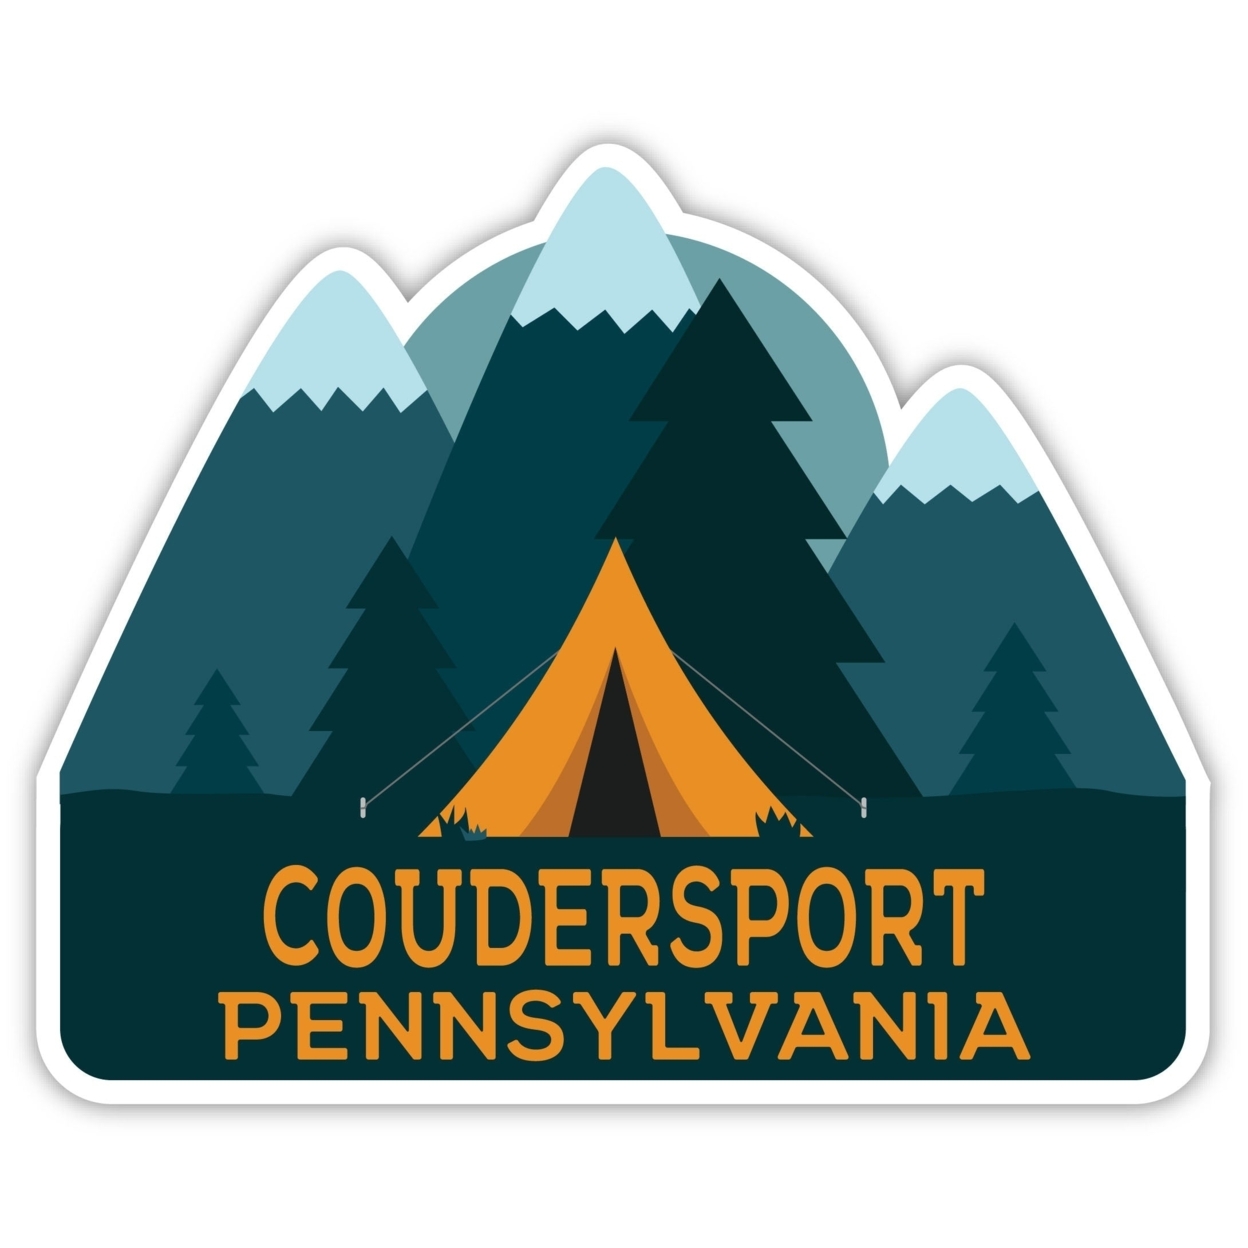 Coudersport Pennsylvania Souvenir Decorative Stickers (Choose Theme And Size) - 4-Pack, 6-Inch, Bear